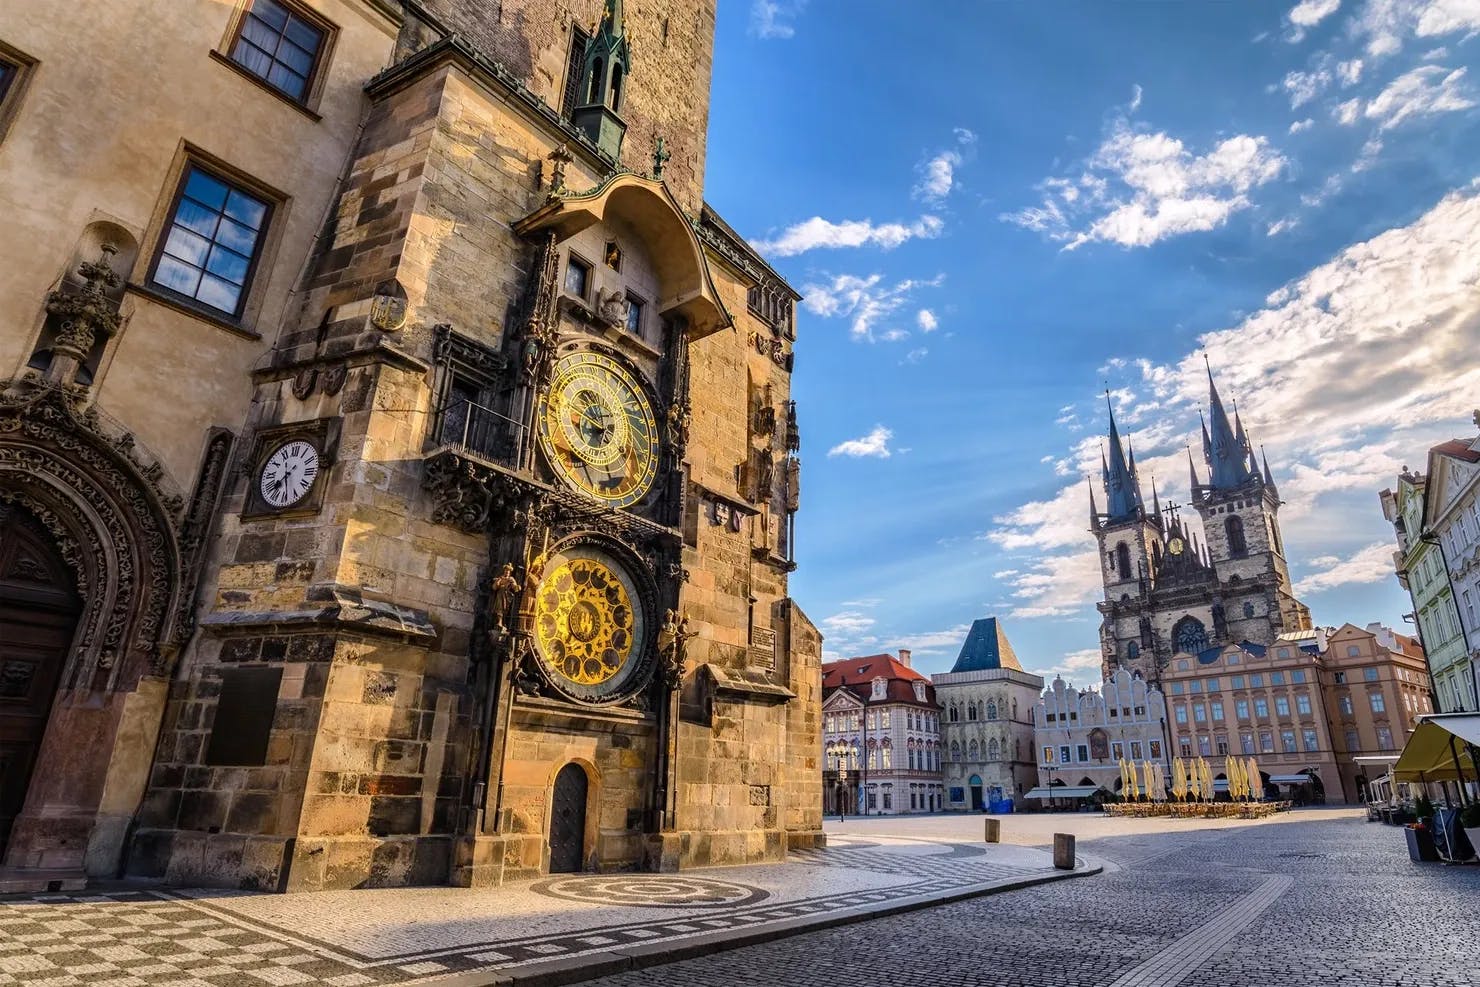 Astronomical Clock on the Old Town Square in Prague, Czech Republic